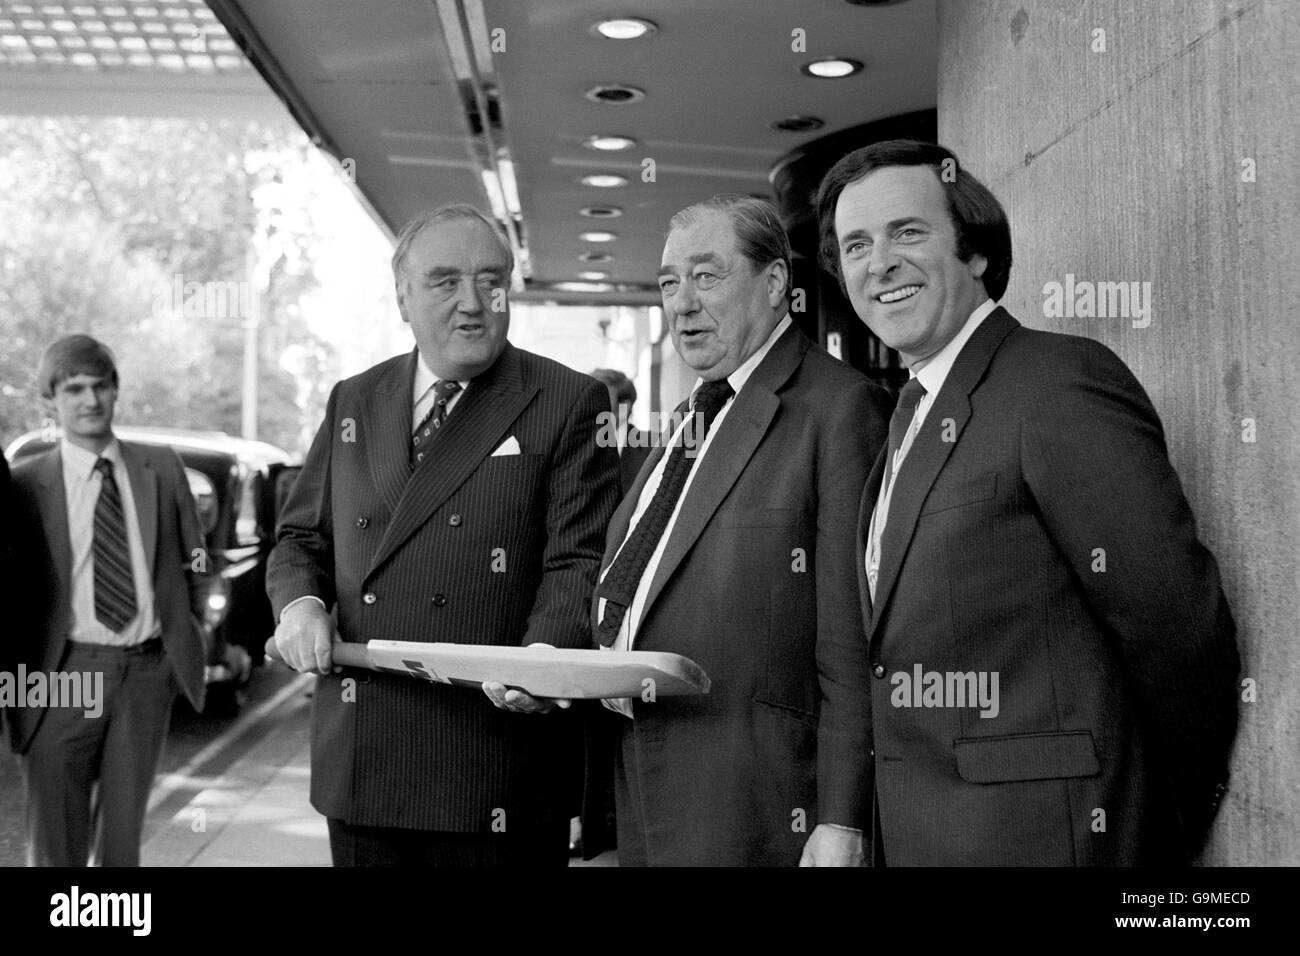 (L-R) Home Secretary Willie Whitelaw with two of the award winners, Sports Personality of the Year John Arlott and Radio Personality of the Year Terry Wogan Stock Photo